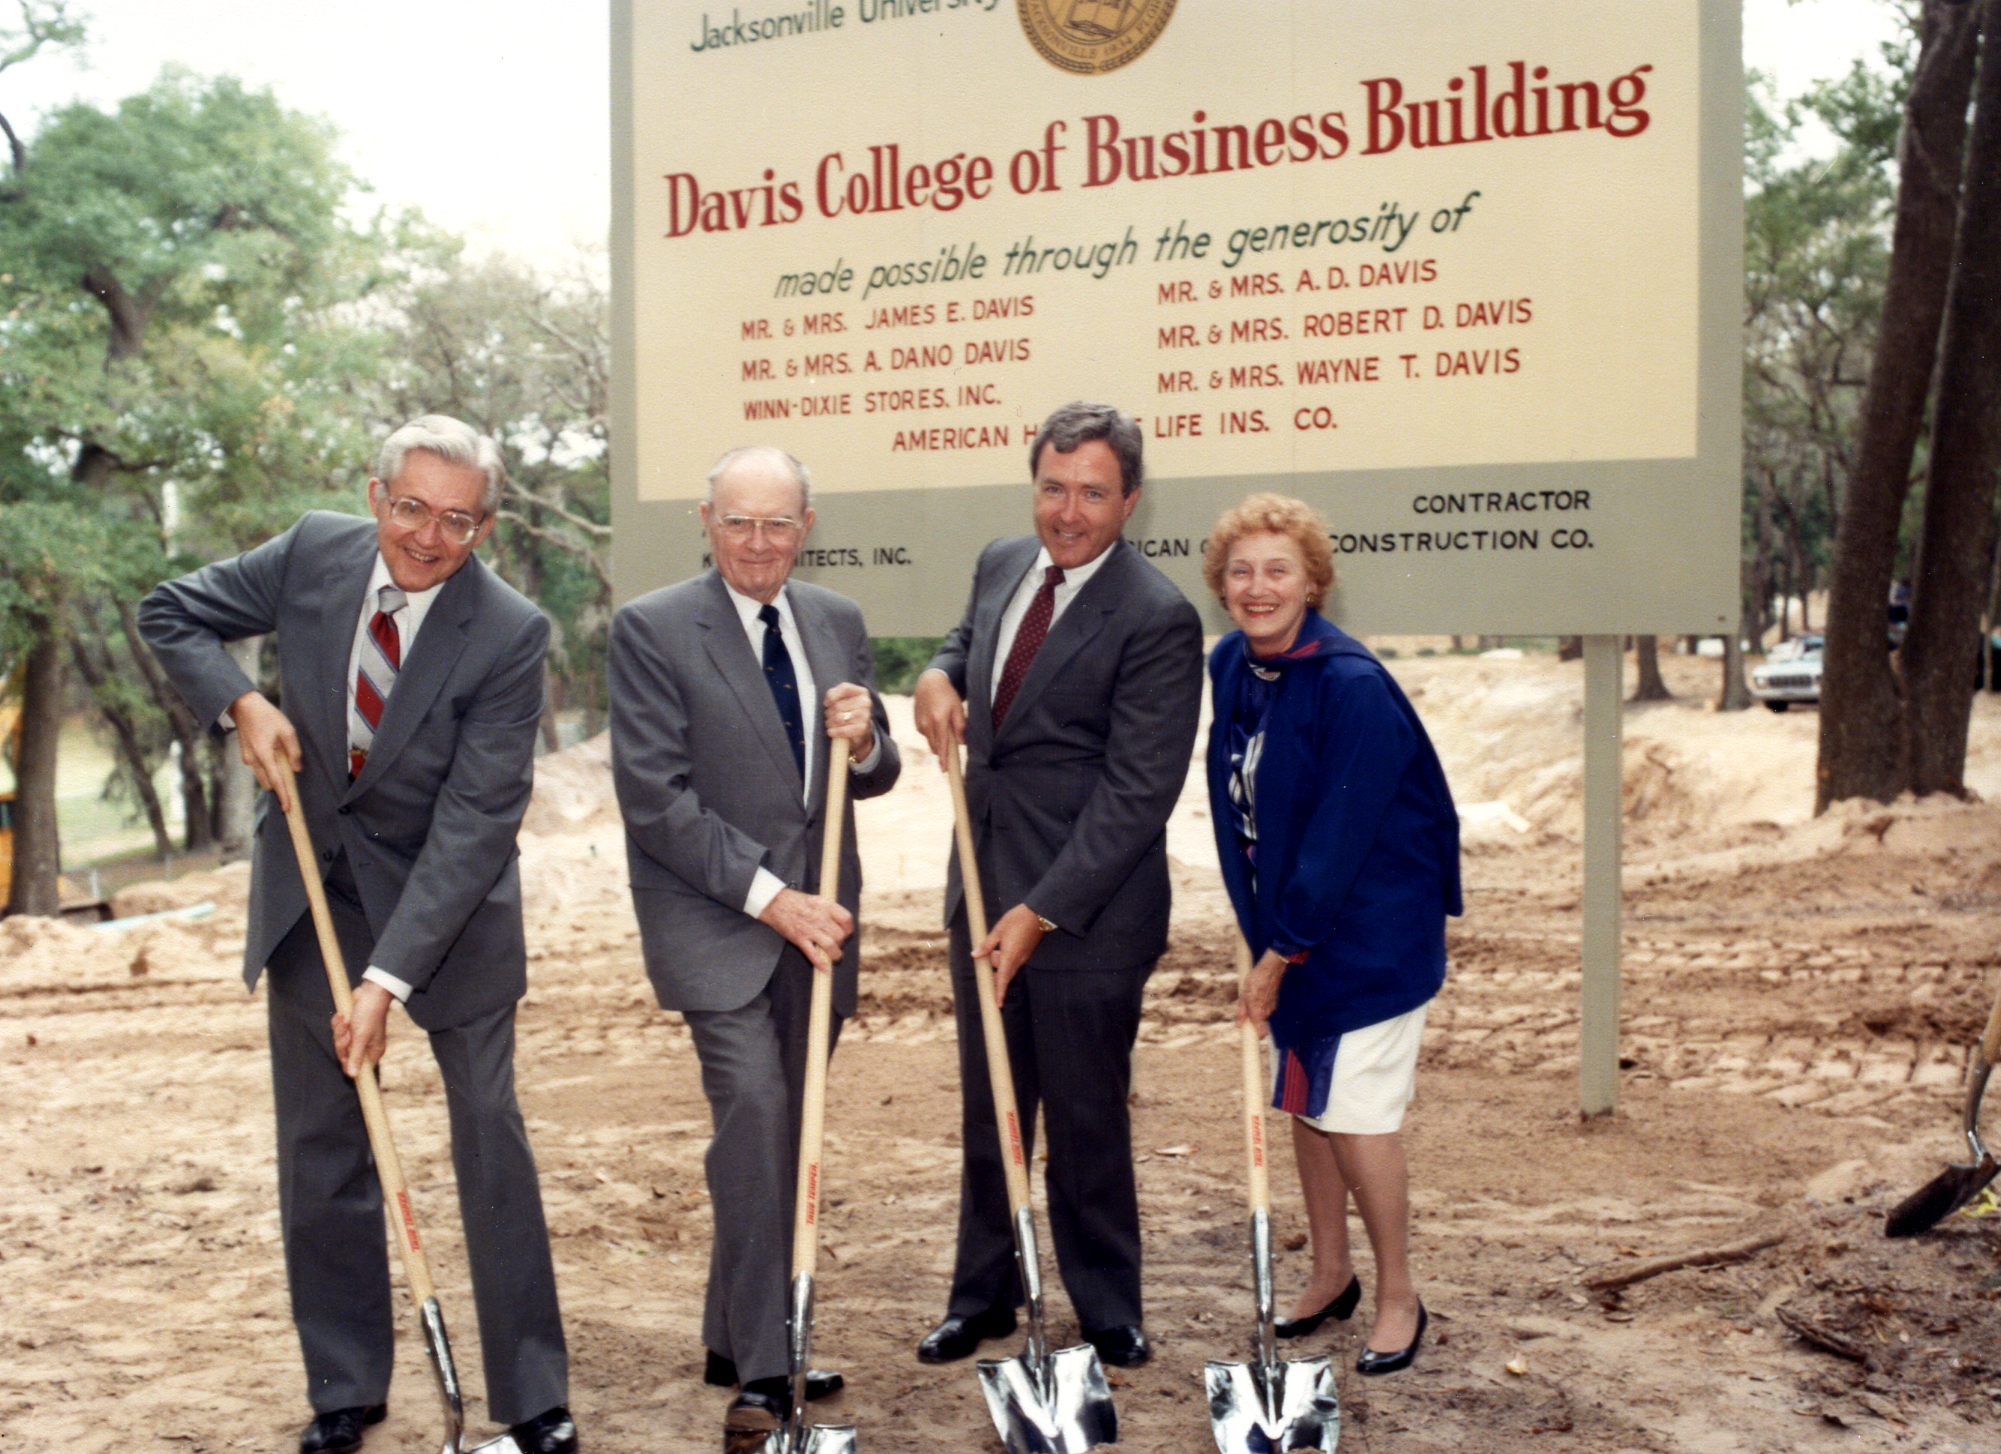 Dr. Francis Kinne breaking ground for the Davis College of Business building. 